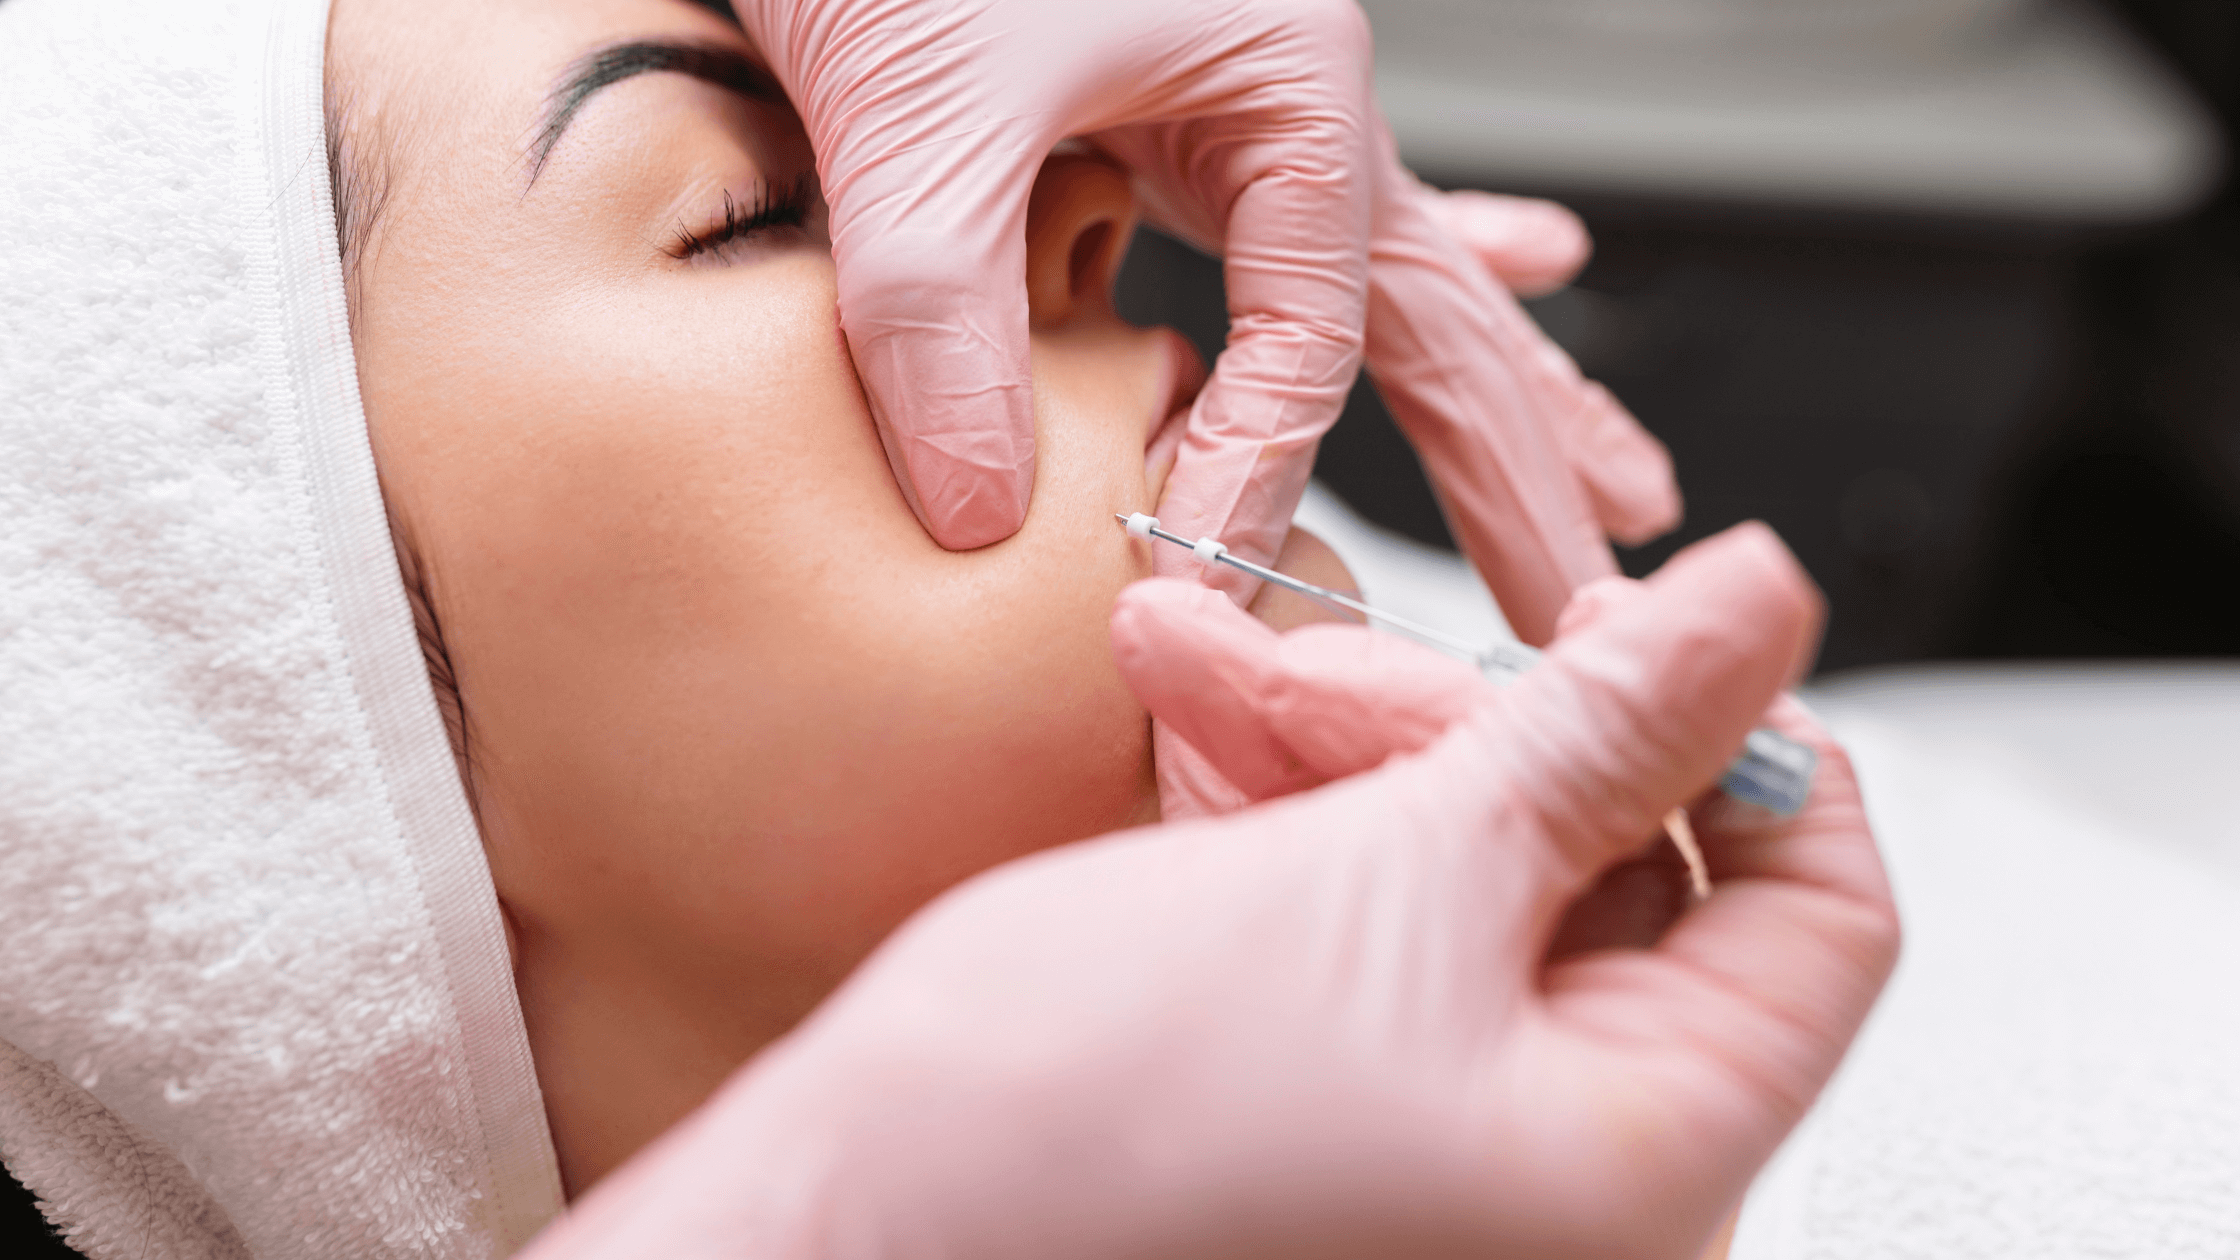 Are Thread Lifts a Safer Alternative to Facelifts?